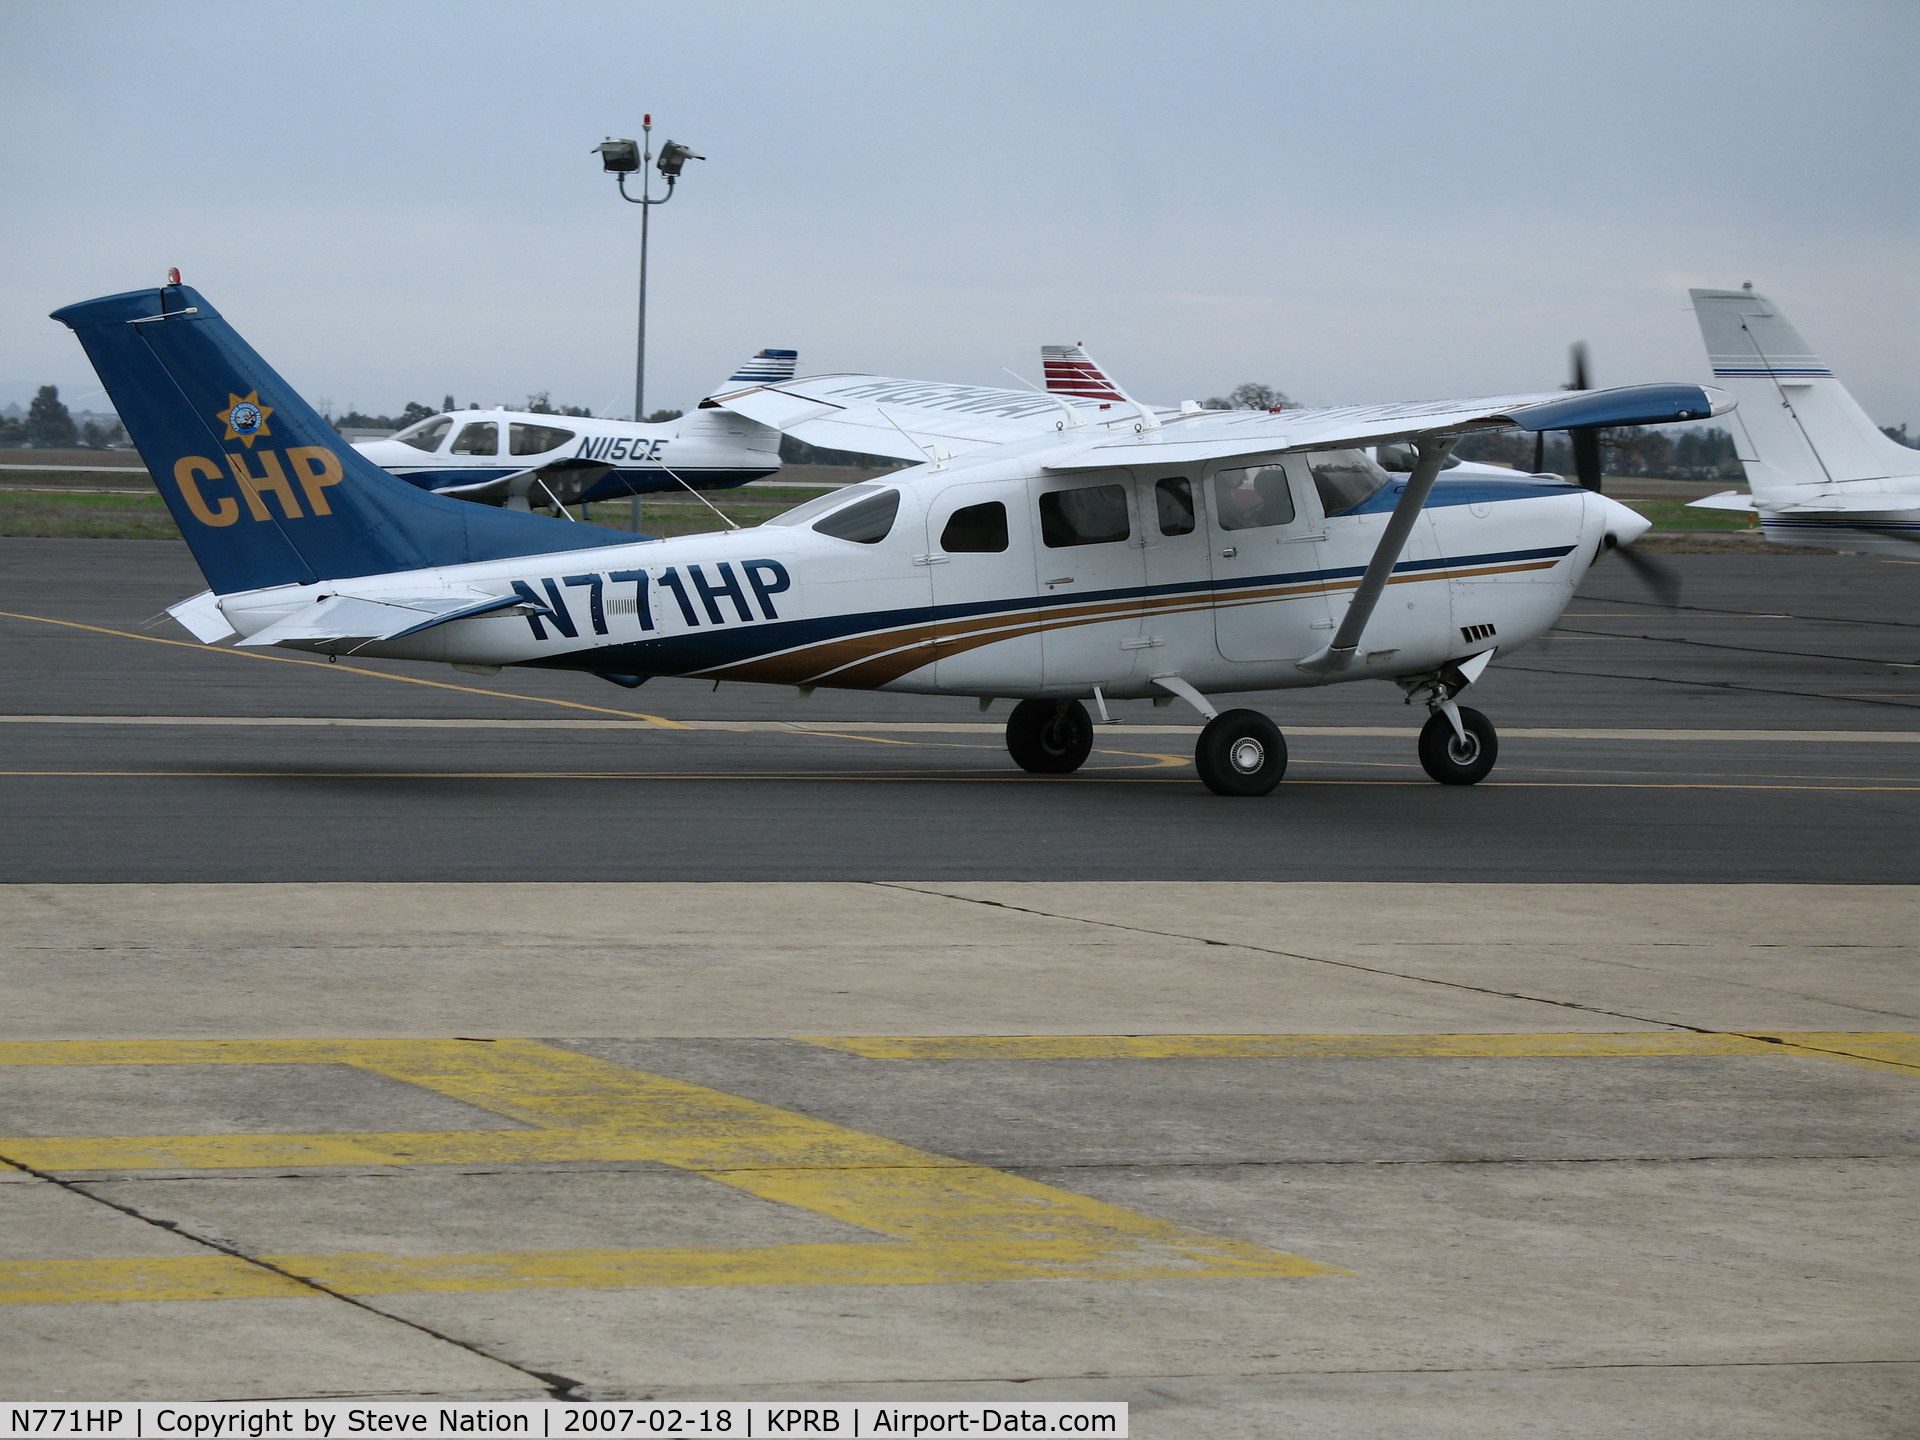 N771HP, 2000 Cessna T206H Turbo Stationair C/N T20608177, Locally-based California Highway Patrol (CHP) 2000 Cessna T206H taxiing @ Paso Robles Municipal Airport, CA